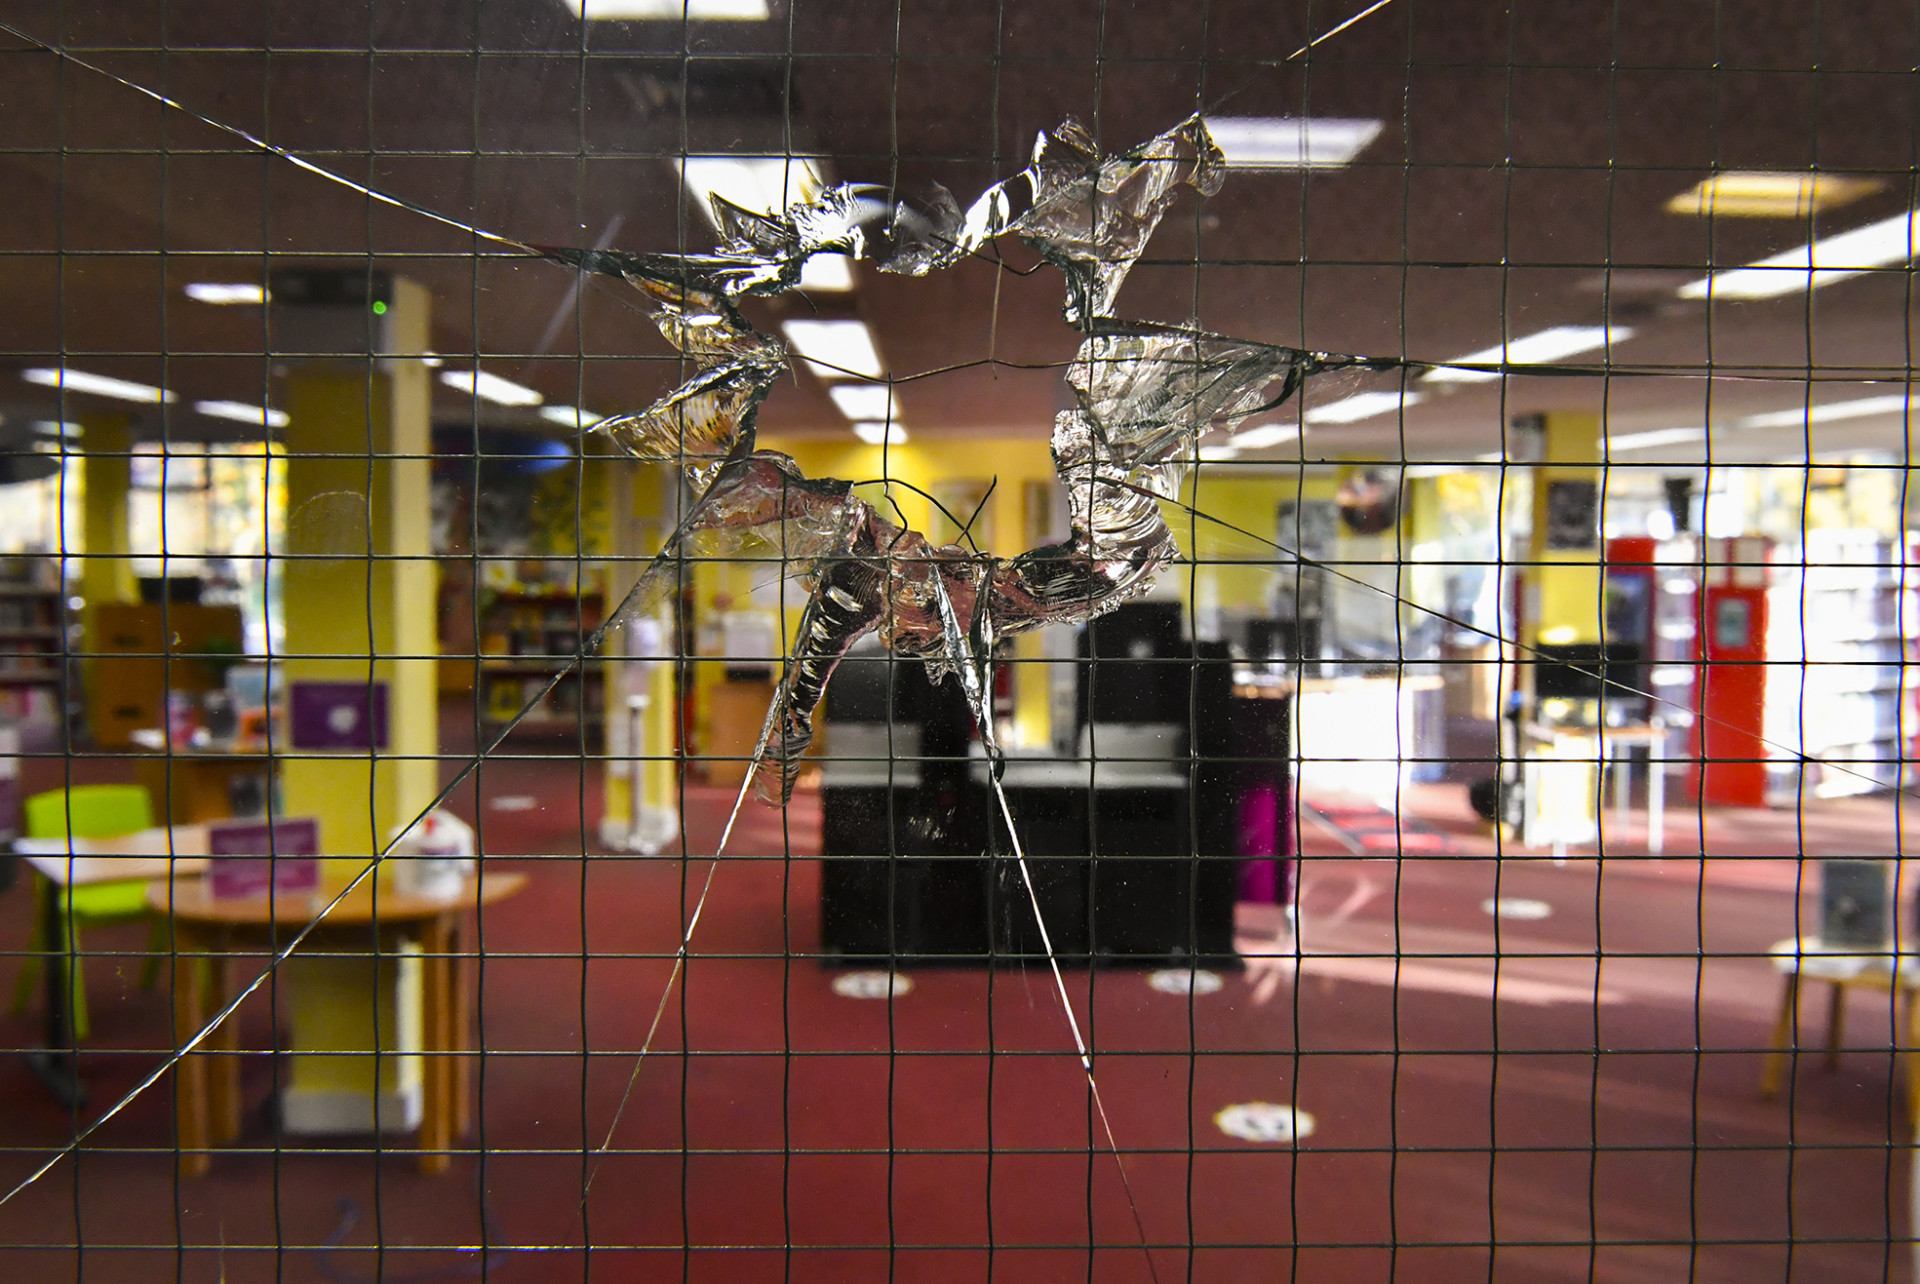 Omagh man accused of library destruction denied bail